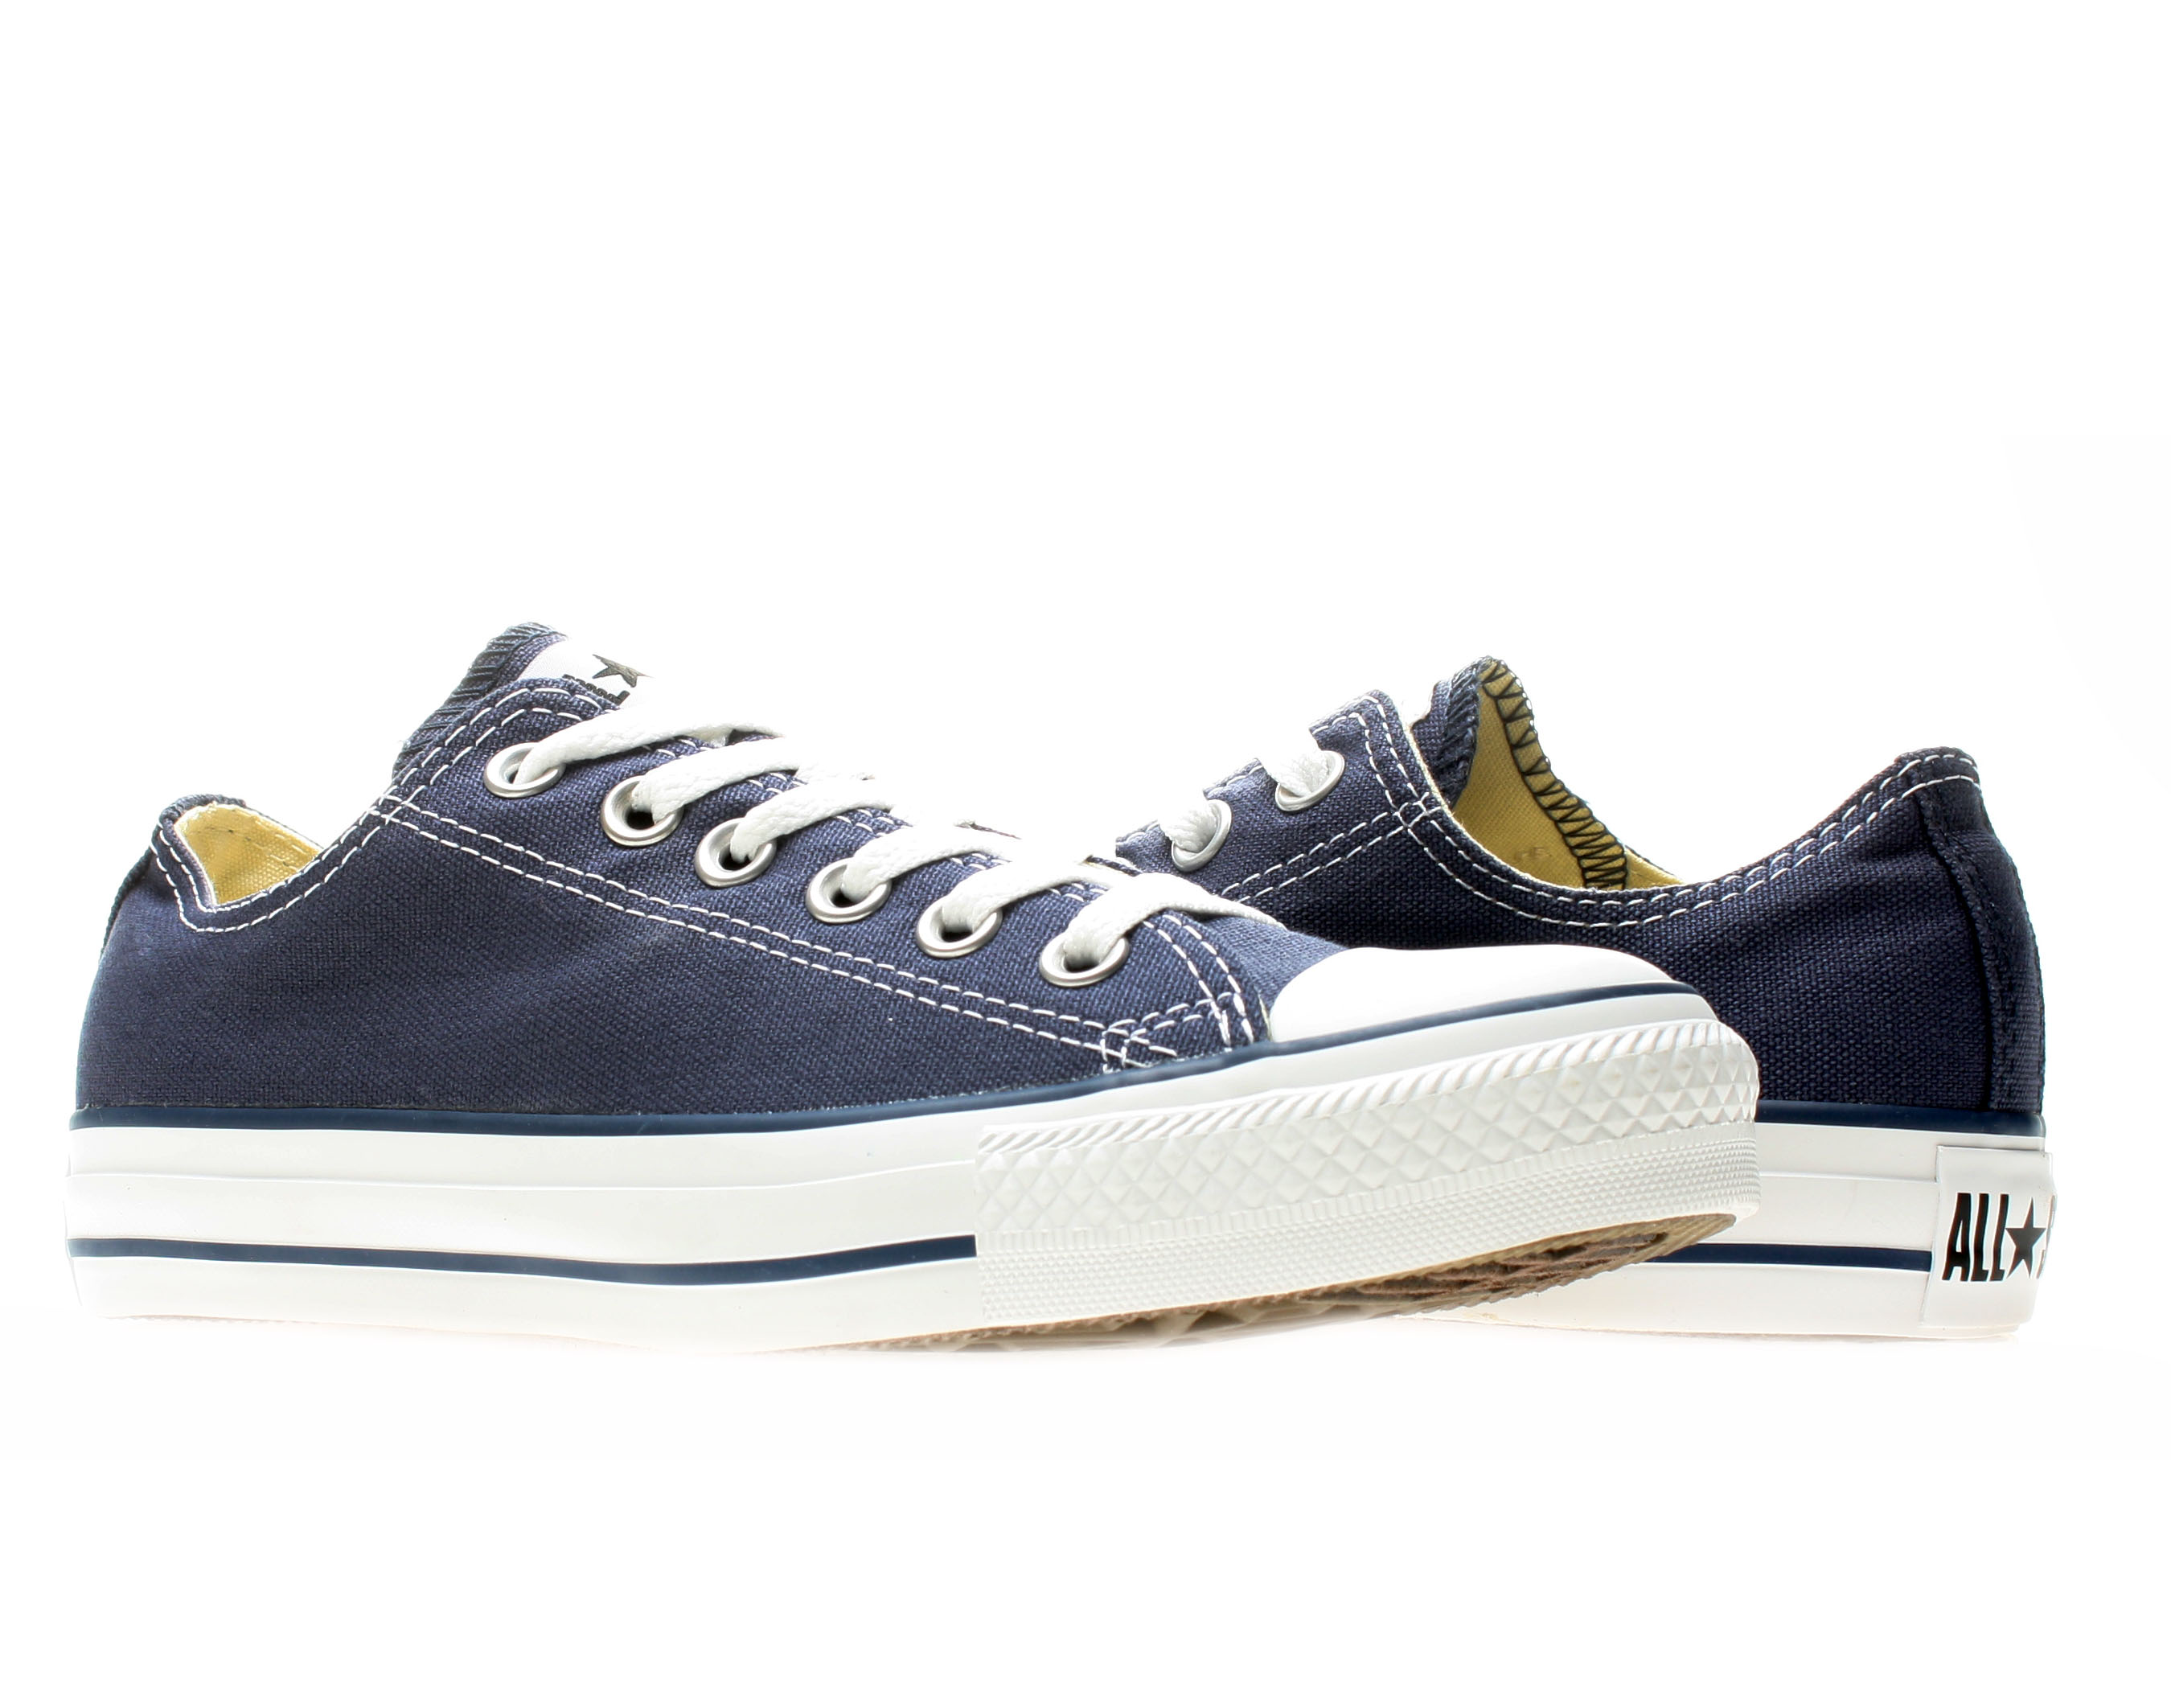 Converse Unisex Chuck low Fashion-Sneakers - image 1 of 6